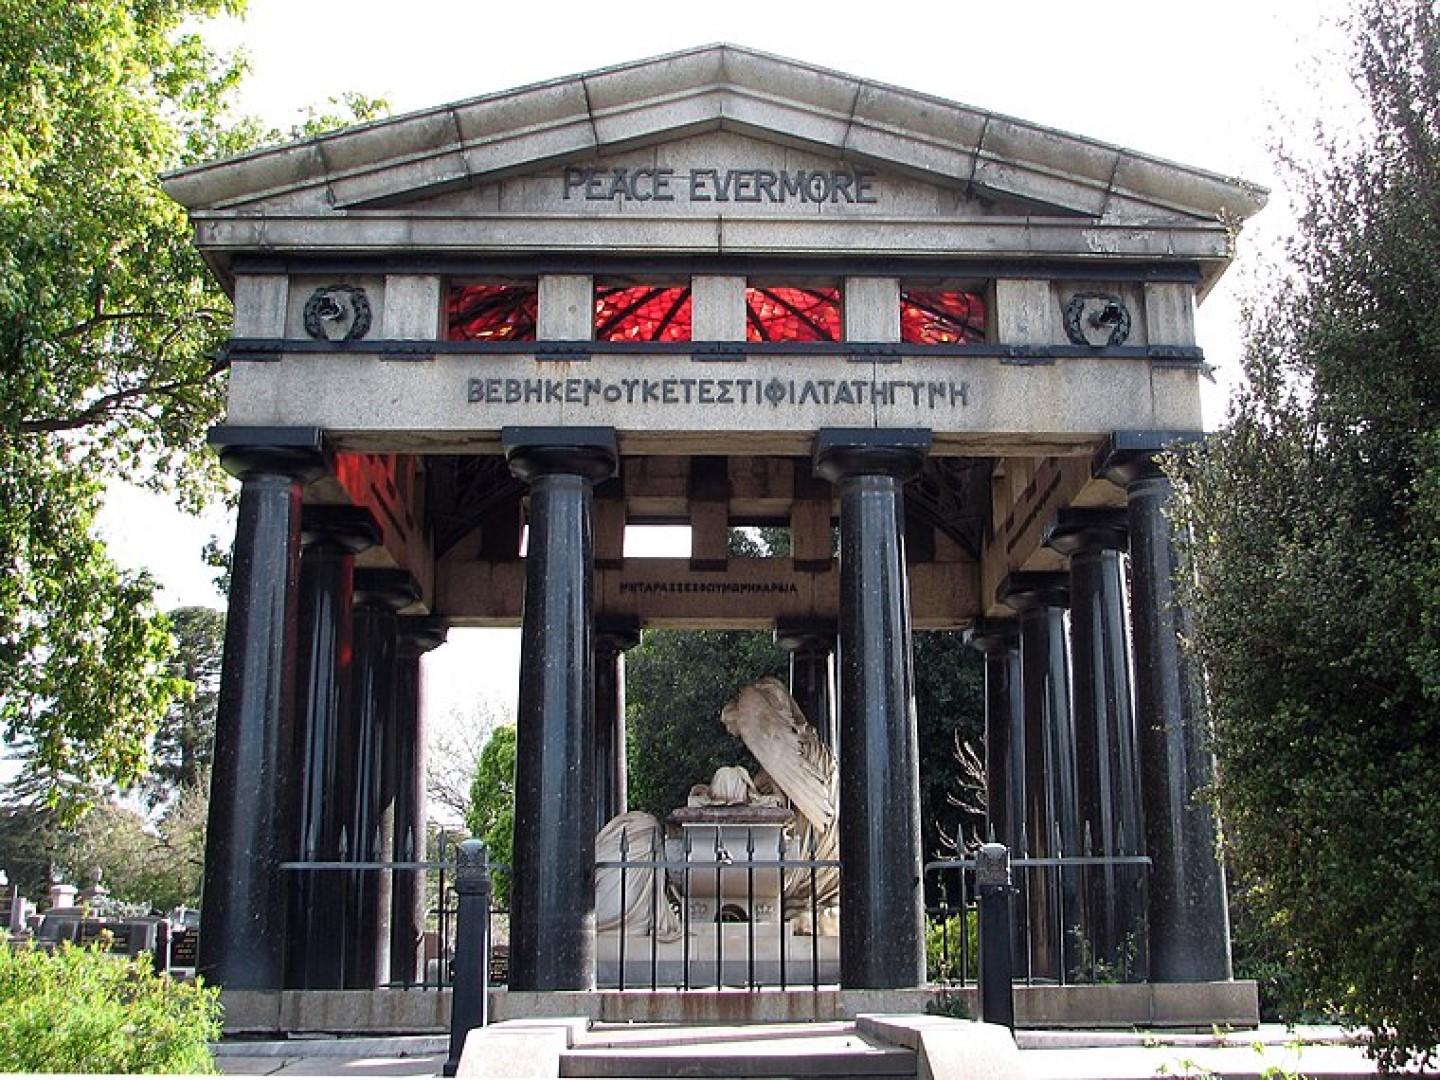 A roman style open air building with coloumns in a cemetary, on the front of the roof it says 'Peace evermore' and there are statues of people inside